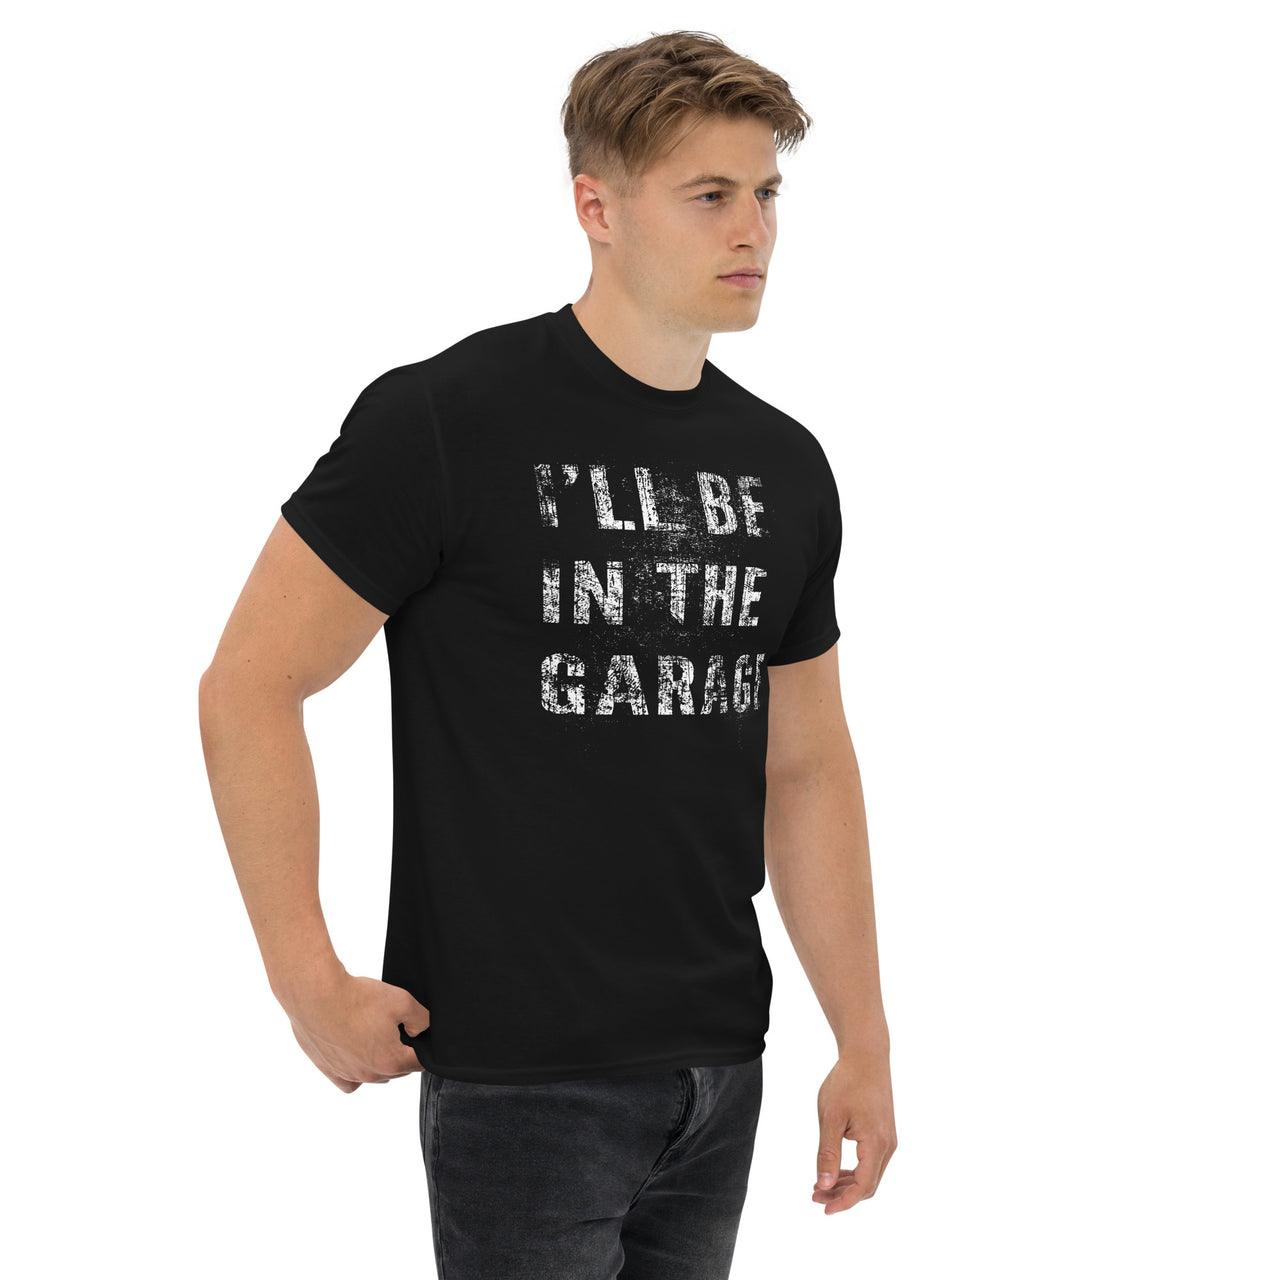 I'll Be In The Garage, Mechanic Shirt , Car Enthusiast T-Shirt - modeled in black